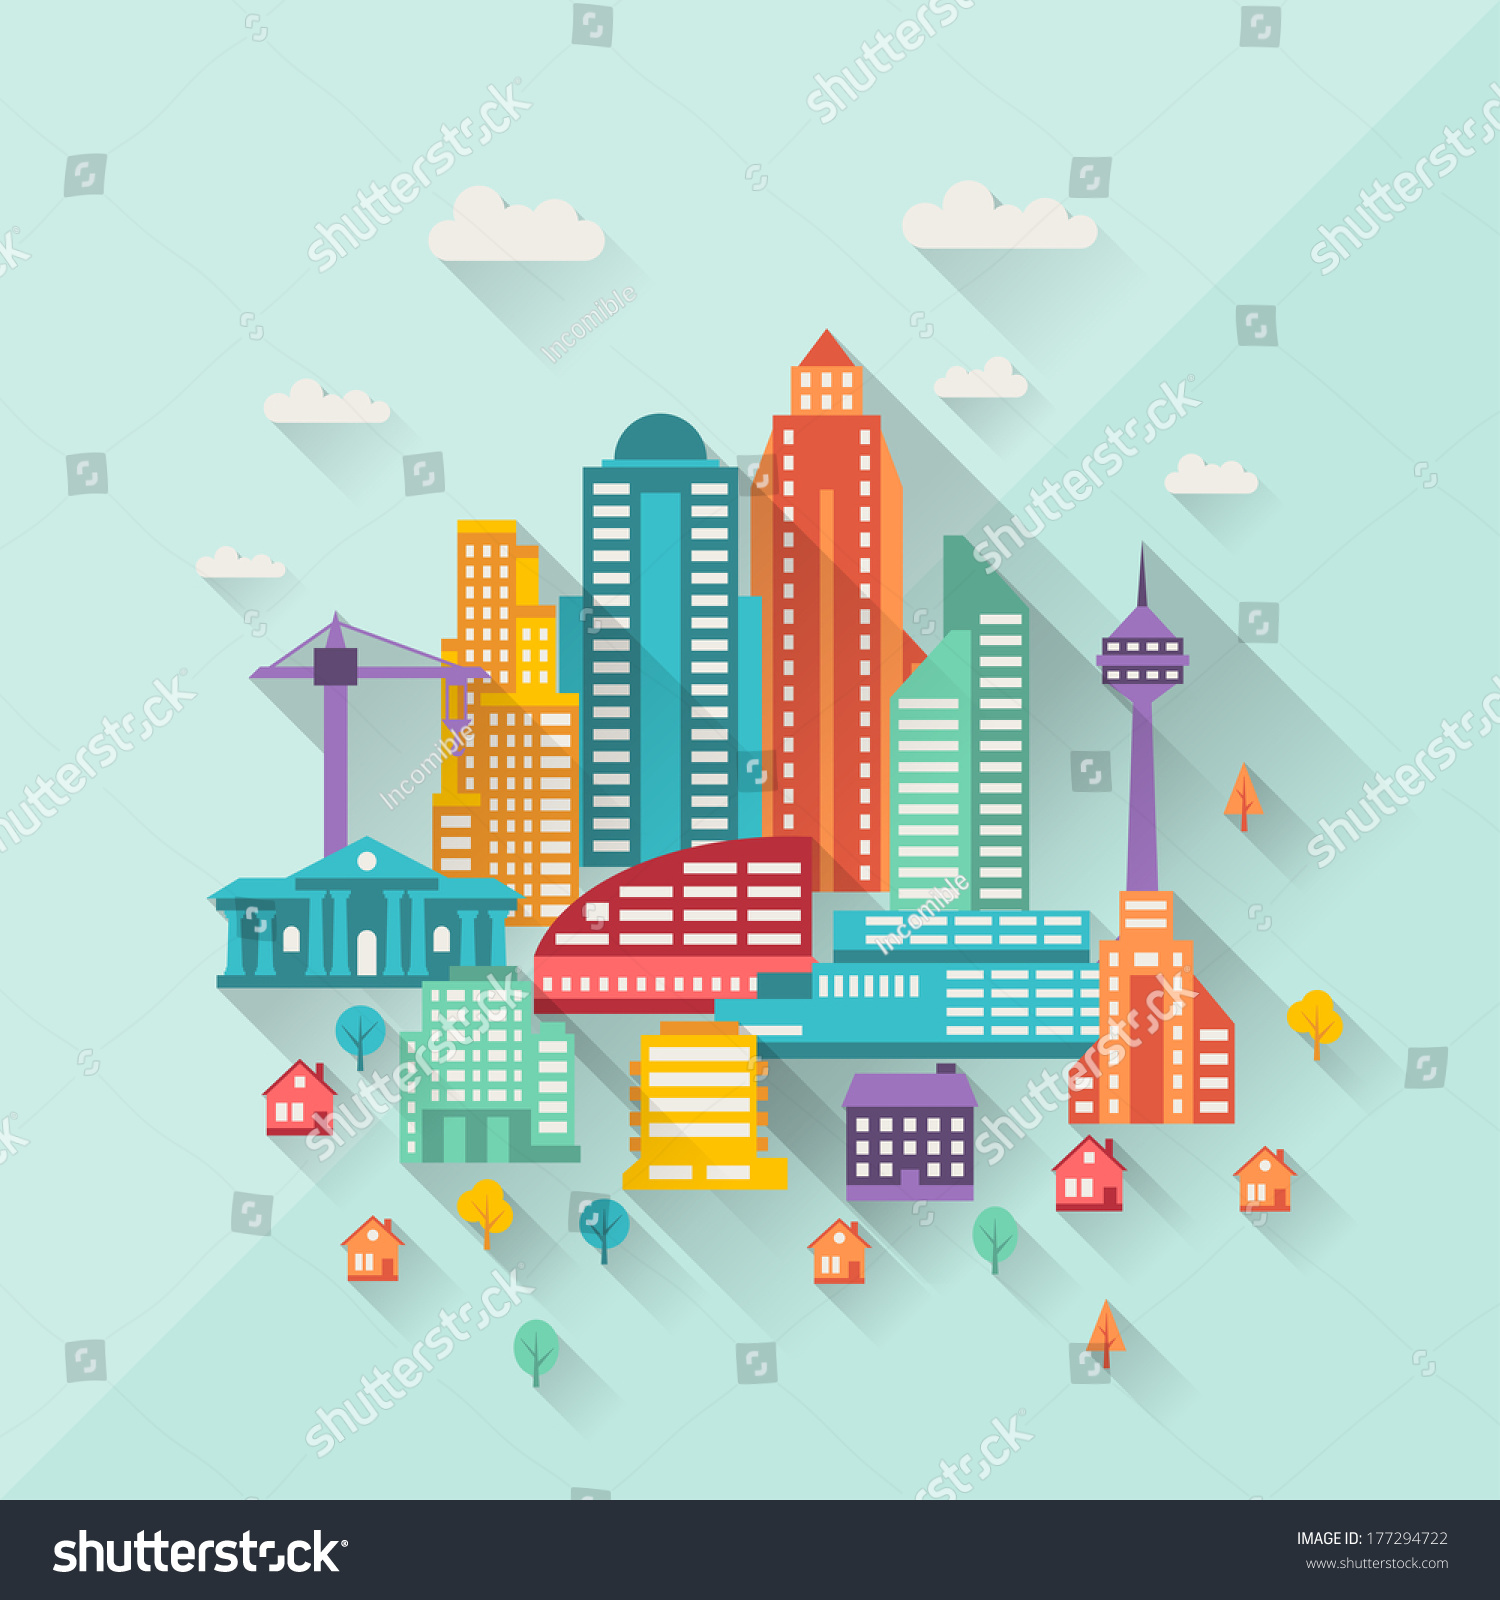 Cityscape Illustration With Buildings In Flat Design Style. - 177294722